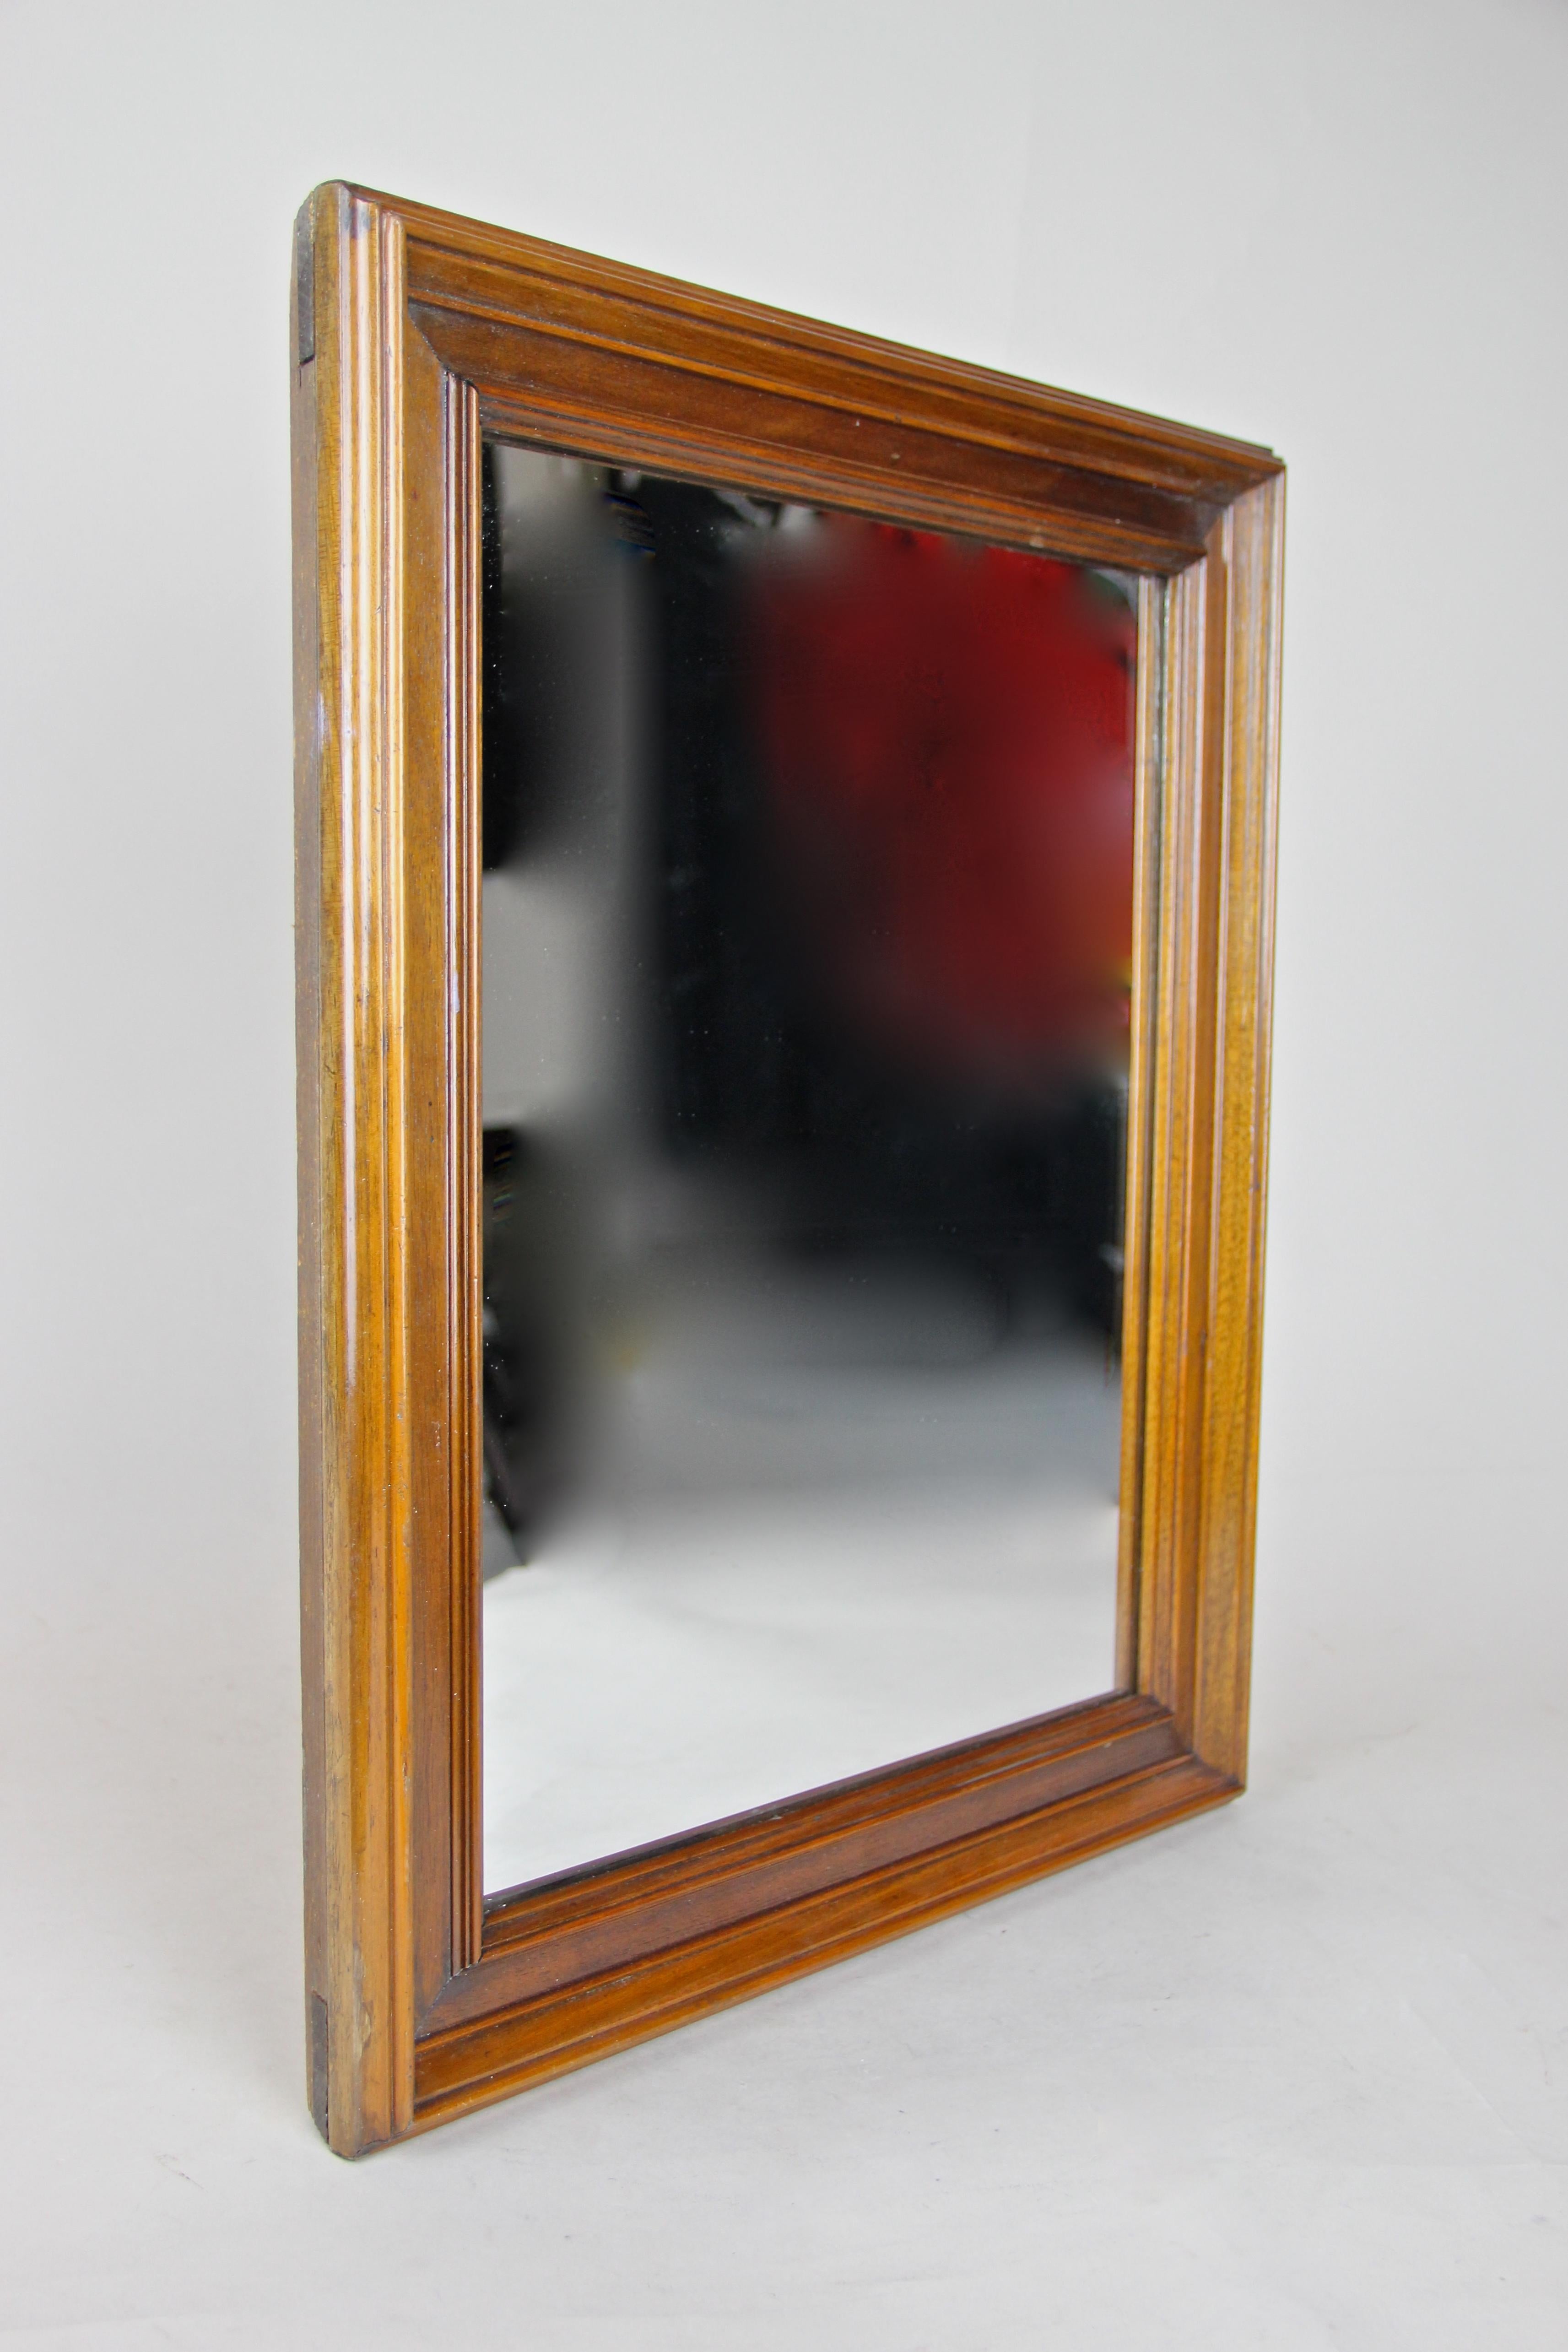 Beautiful Biedermeier Nutwood wall mirror out of Austria from circa 1860, the second period. This mid-sized 19th century wall mirror features great carved nut wood bars over an overlapped inserted substructure. The straight design alongside the